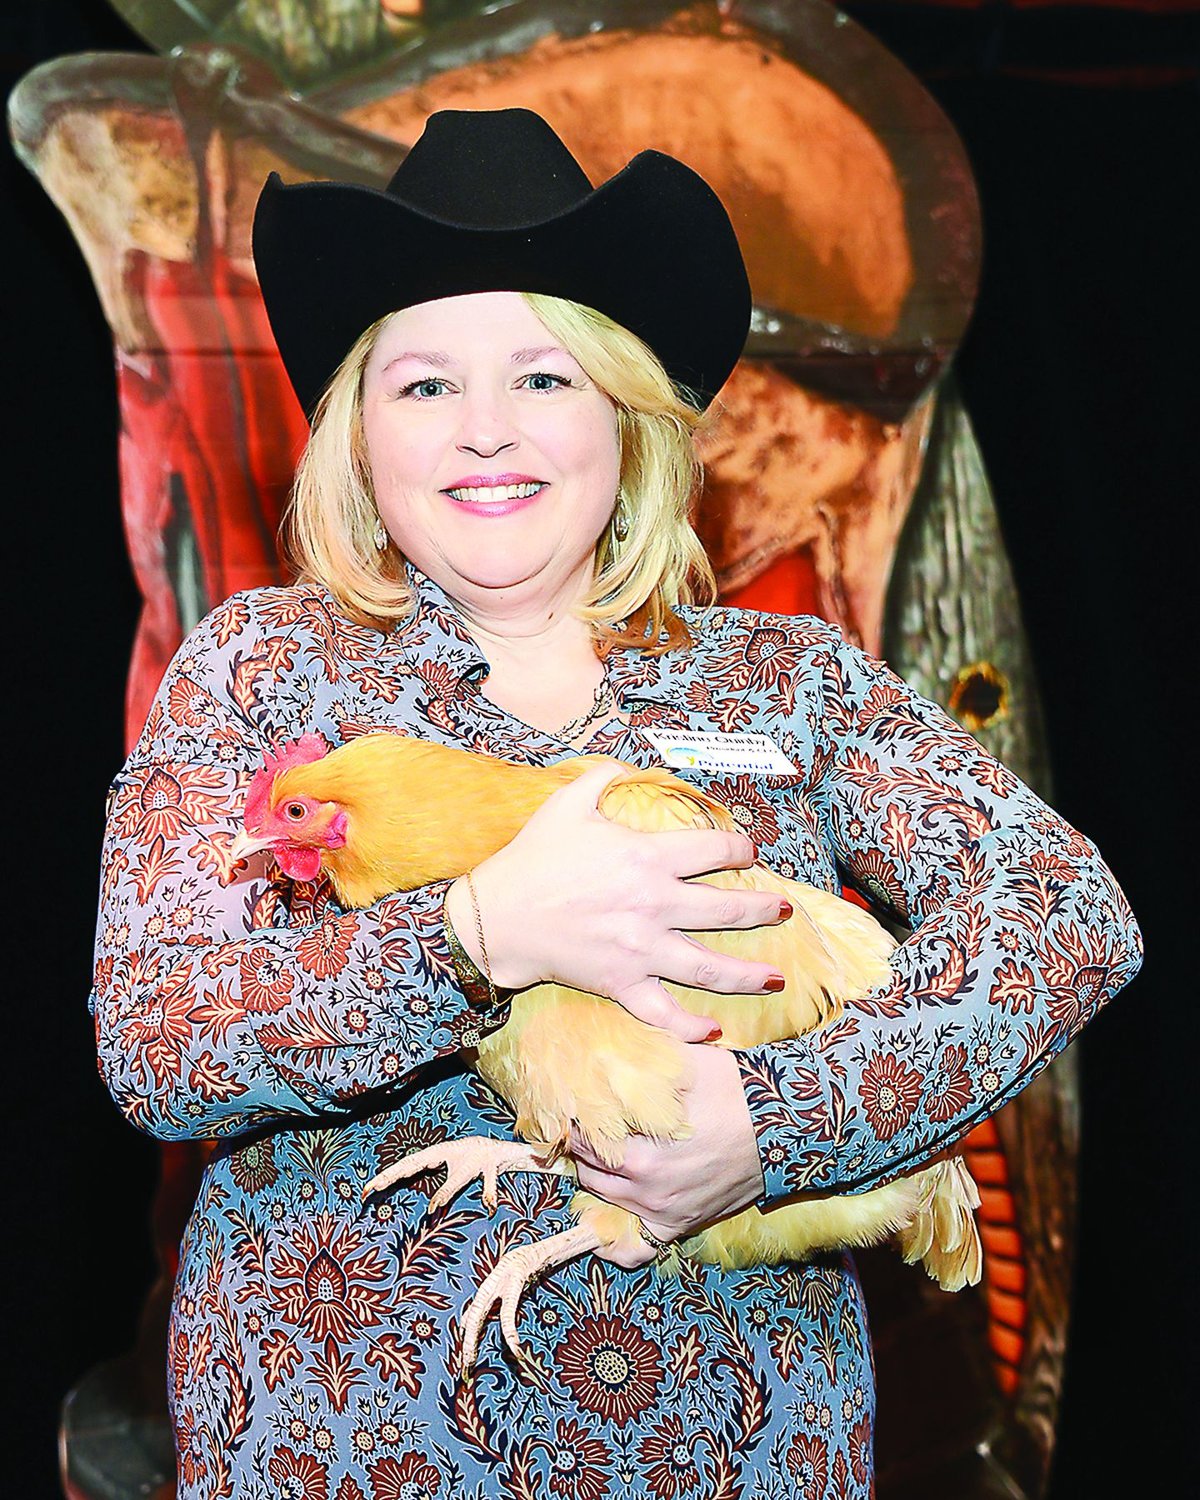 Kristine Quinby, founder, president and CEO of Potential, at the HoeDown, ThrowDown for Autism Treatment.